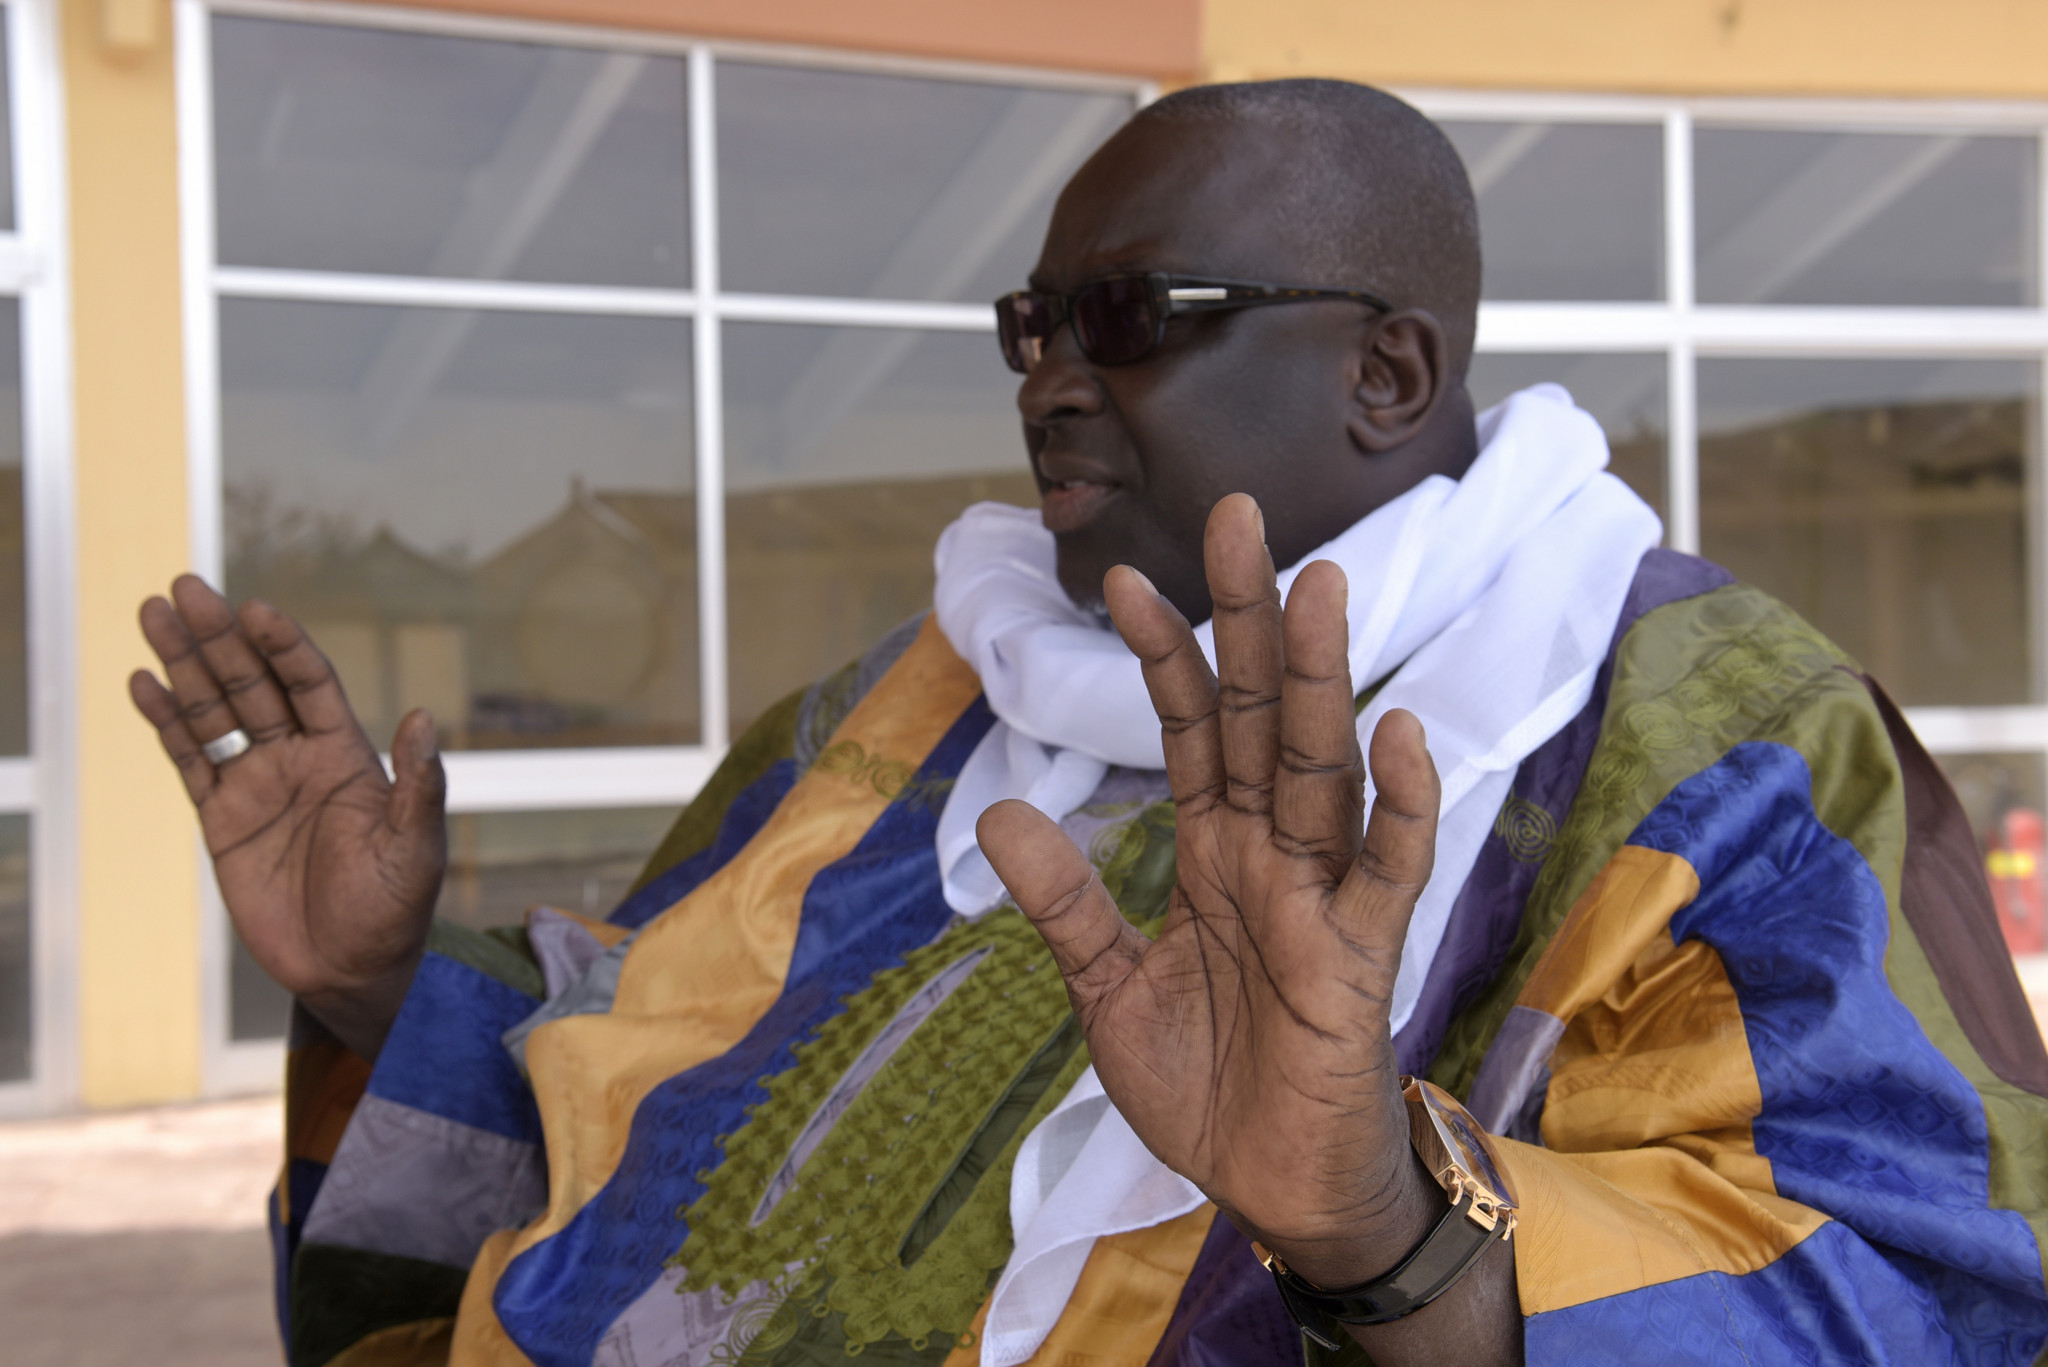 A five-year jail term has been requested for Papa Massata Diack, who has refused to be extradited to France ©Getty Images